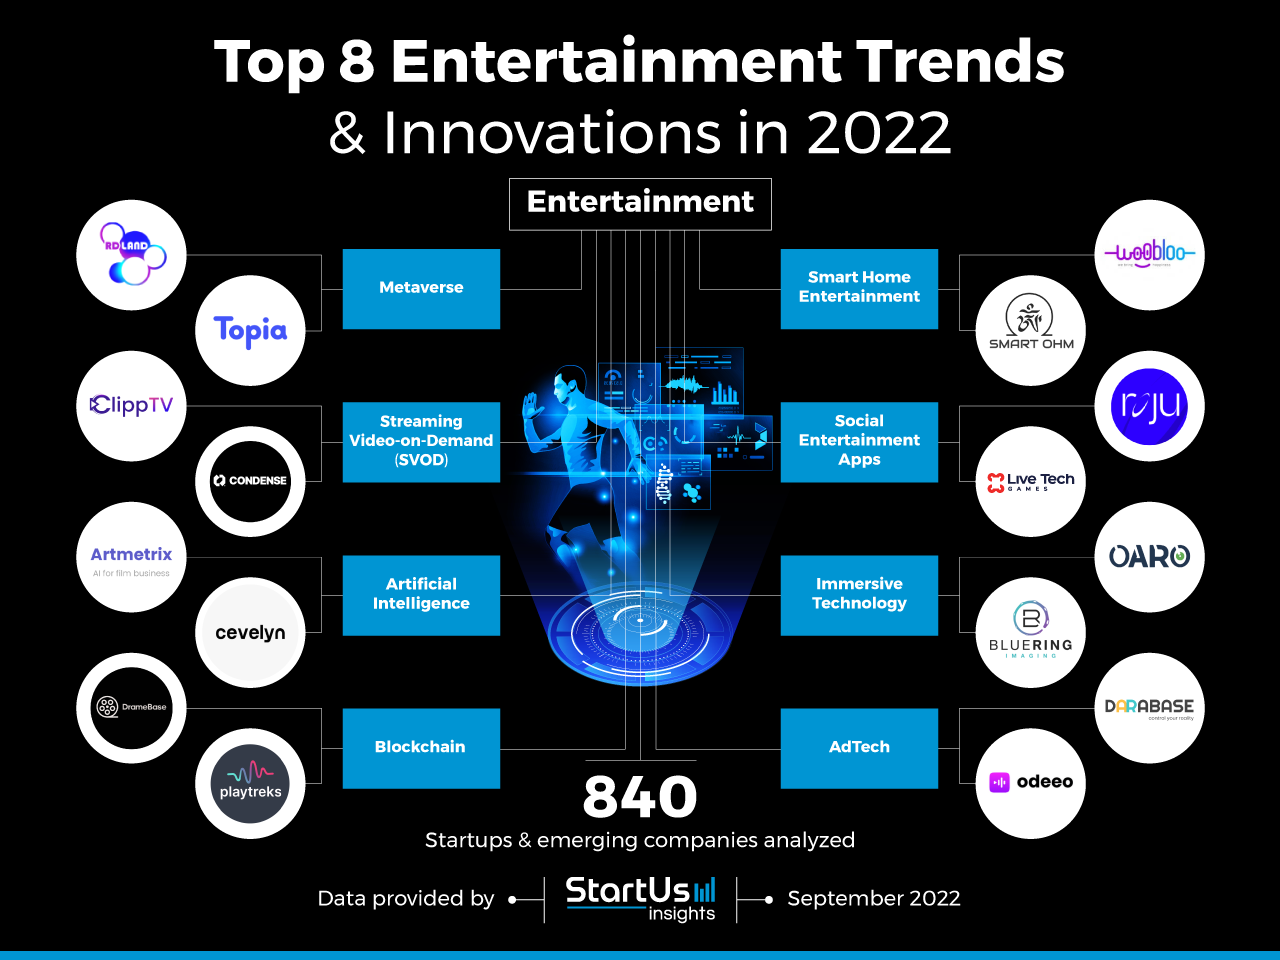 Top 8 Entertainment Trends & Innovations 2022